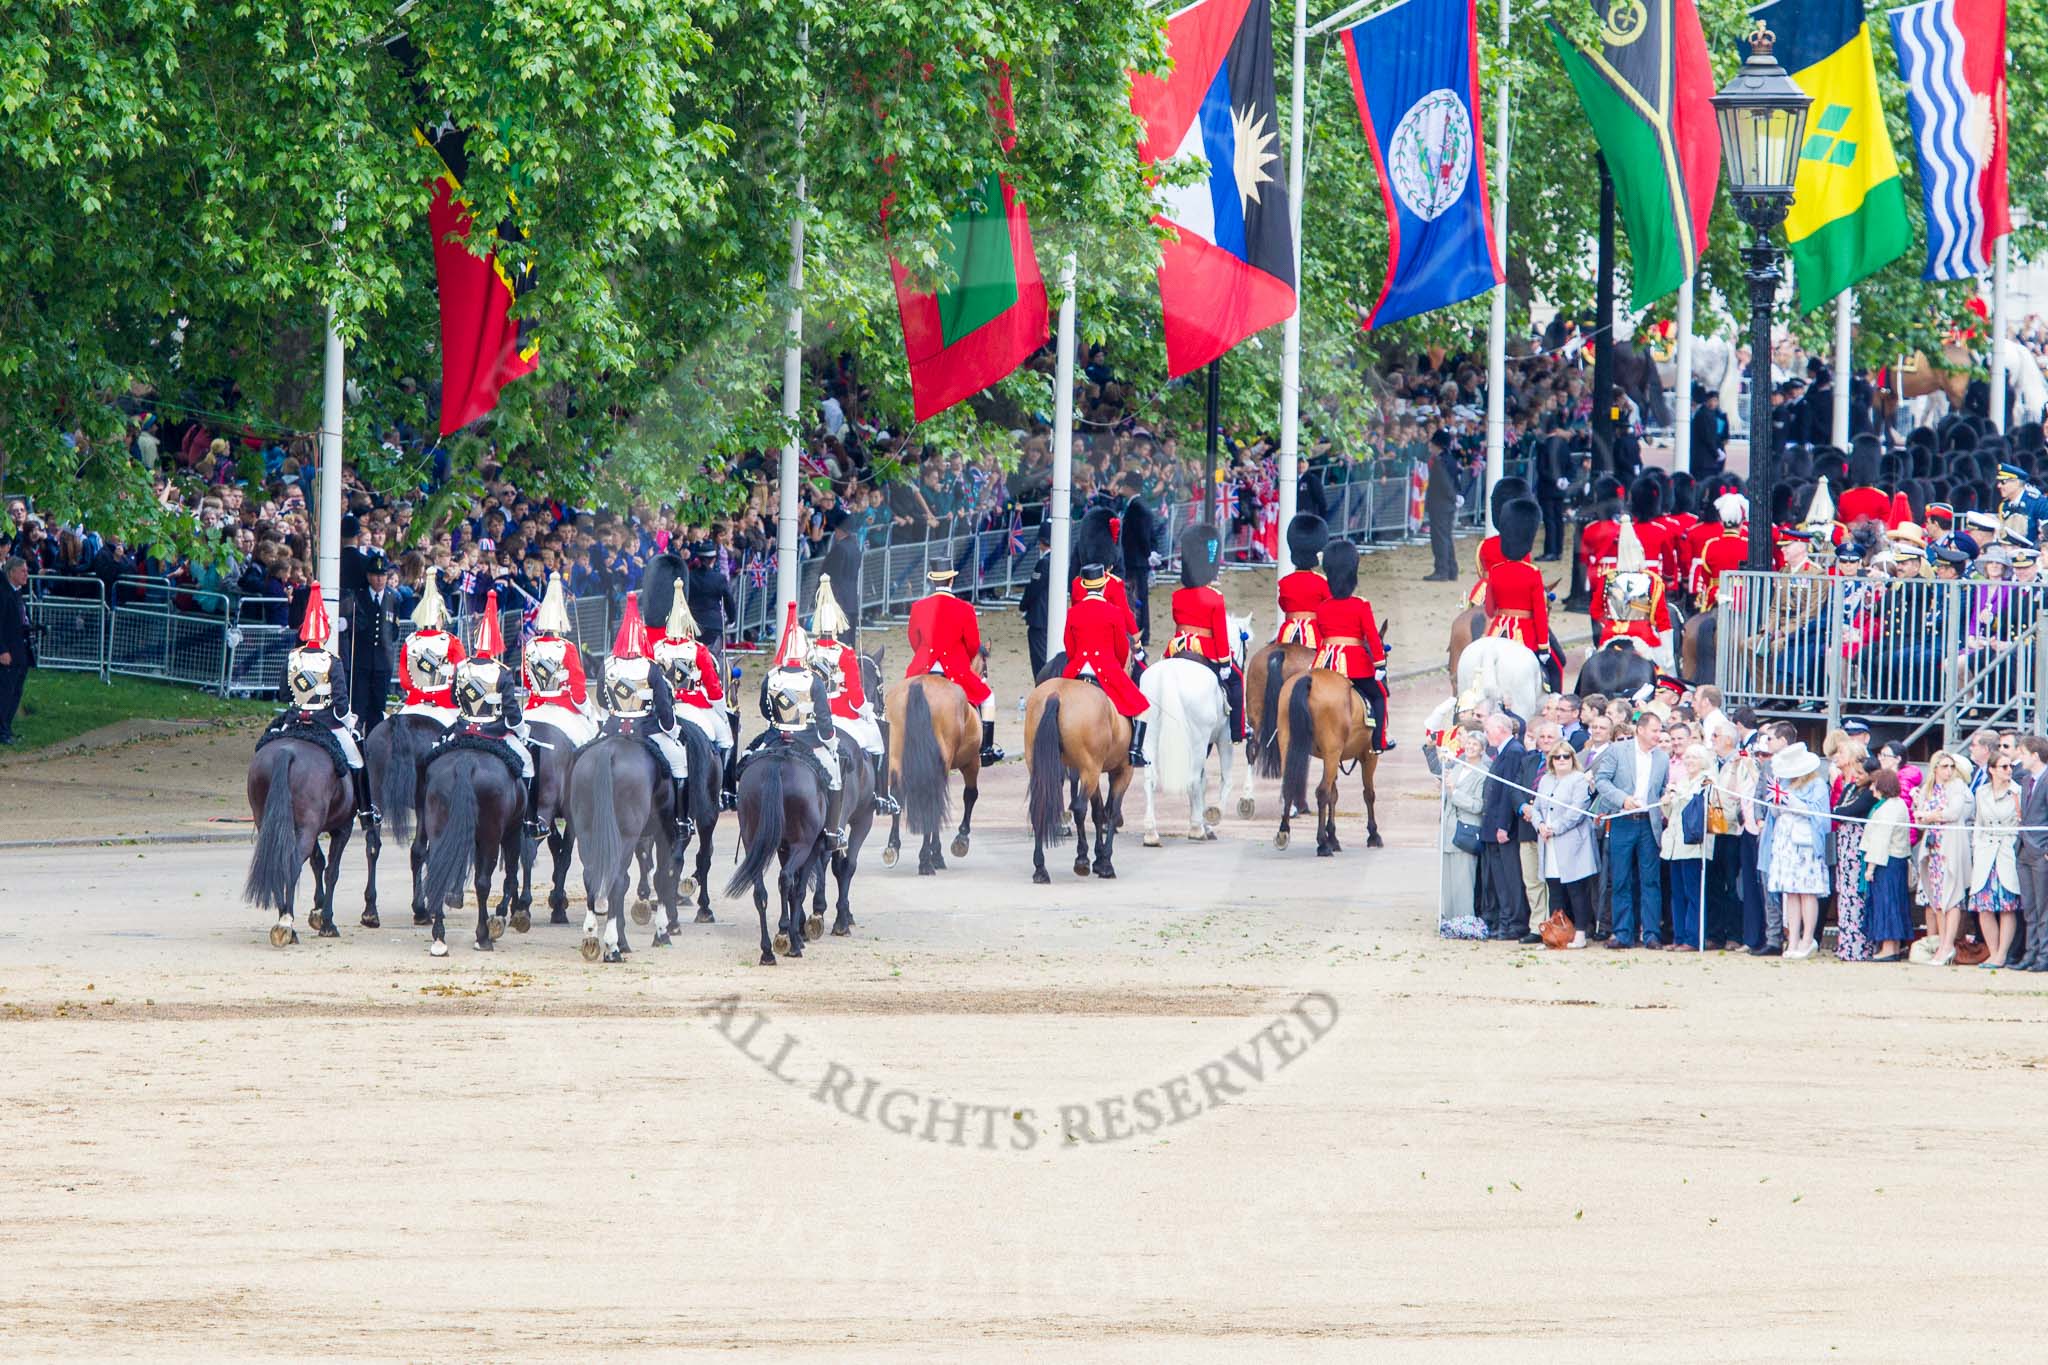 Trooping the Colour 2013: The March Off - the "second half" of the Royal Procession following the guards divisions. Image #870, 15 June 2013 12:14 Horse Guards Parade, London, UK